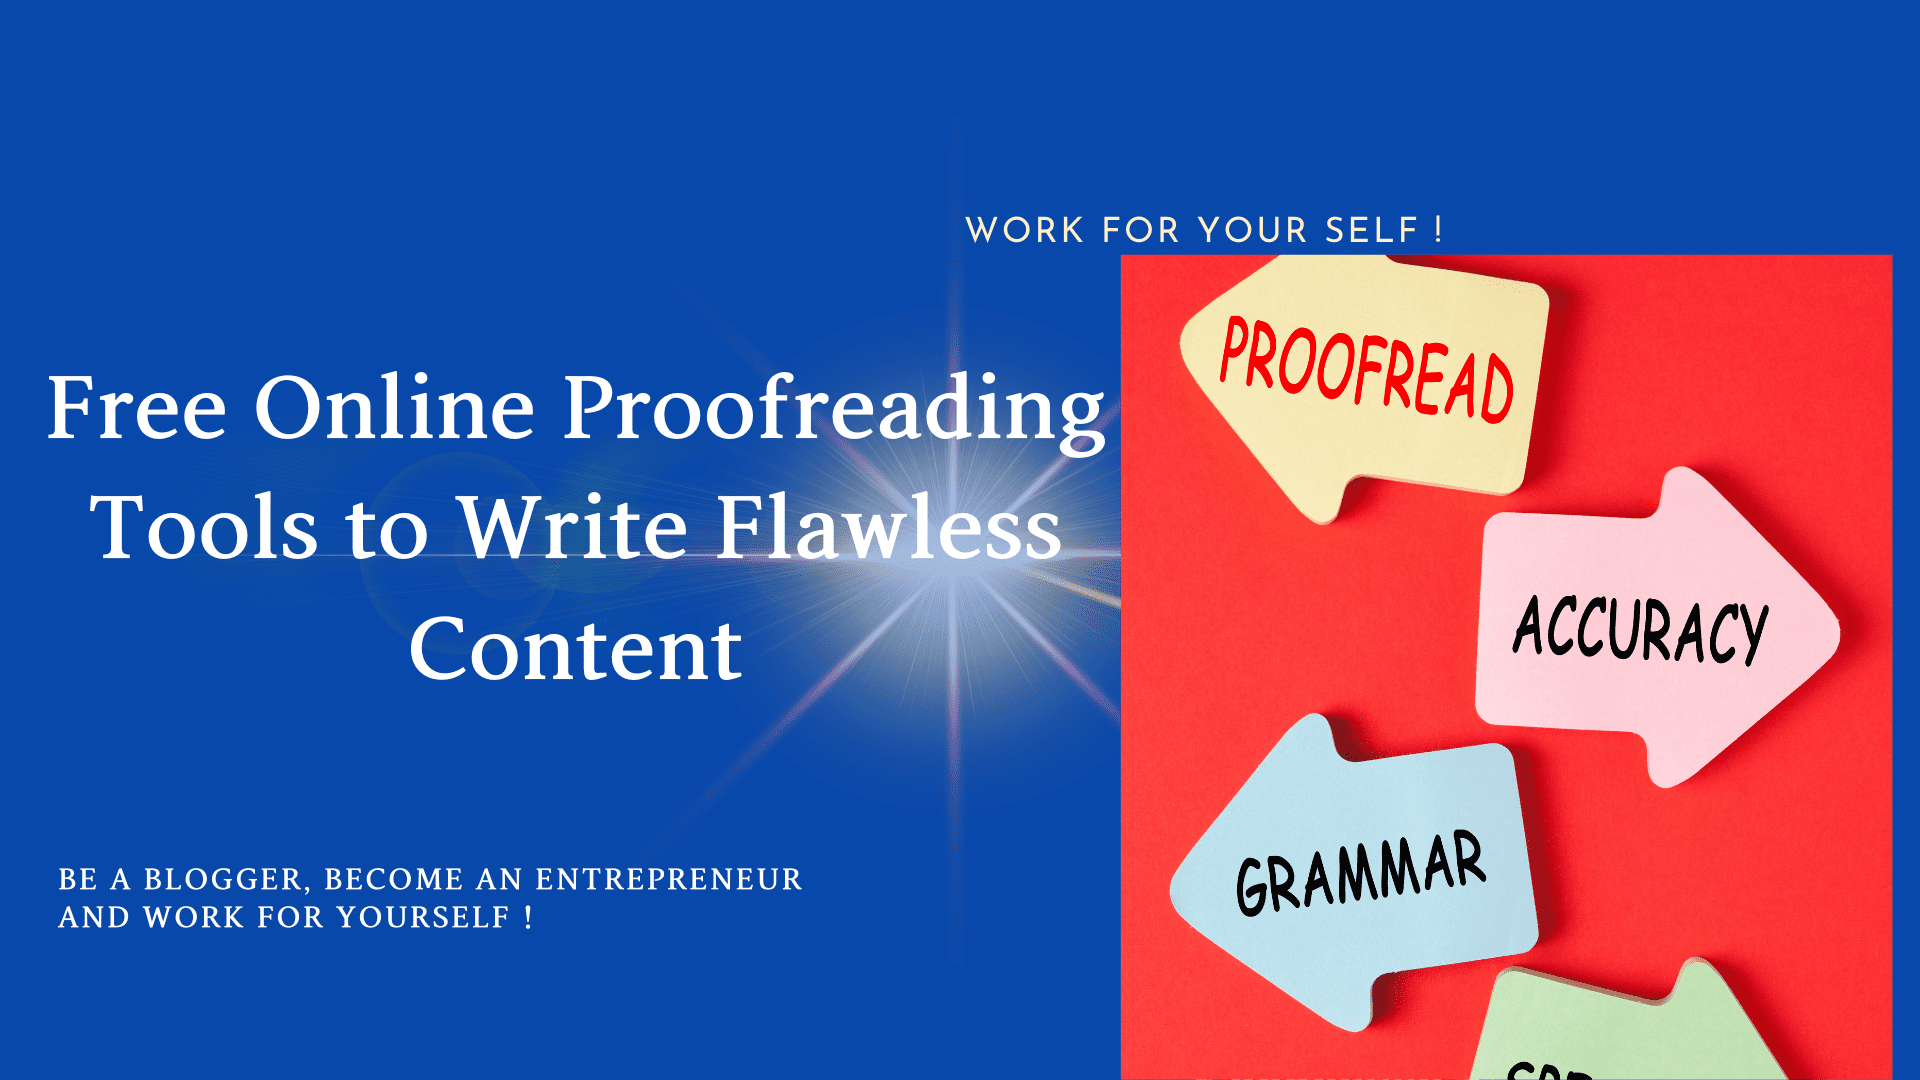 proofreading tools